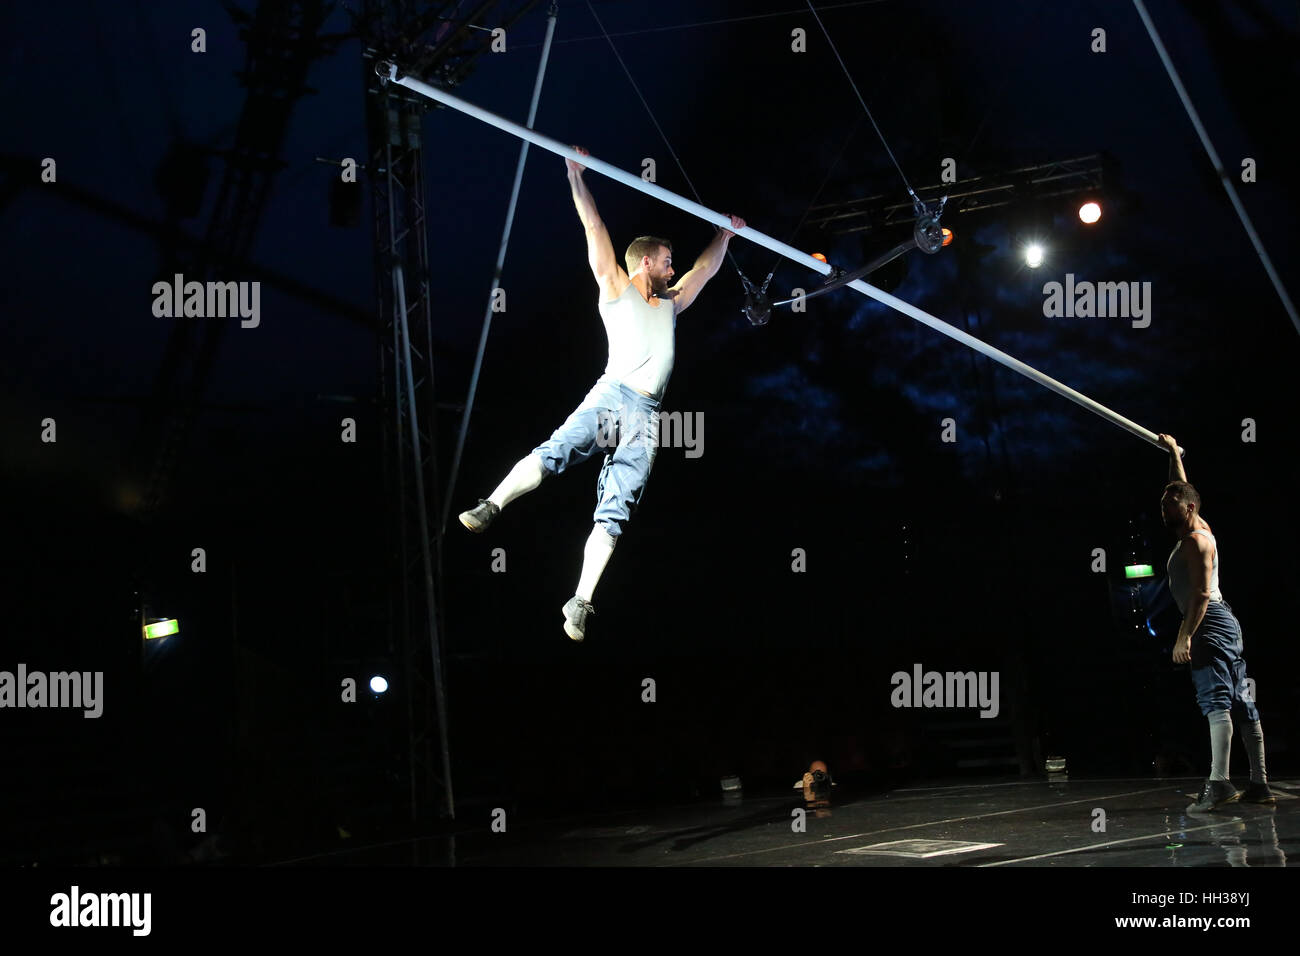 Sydney, Australia. 17 January 2017. London-based aerial theatre company, Ockham’s Razor, push themselves to the limit on 5 metre-long metal poles that transform into a myriad of walkways, pillars and pendulums in a blend of circus, acrobatics, playground games and trust exercises. Set in the round with the audience drawn in close to the action, the five performers are enclosed within the circle of the stage. Tipping Point is showing at the Spaghetti Big Top, Prince Alfred Square, Parramatta for the Sydney Festival. Credit: © Richard Milnes/Alamy Live News Stock Photo